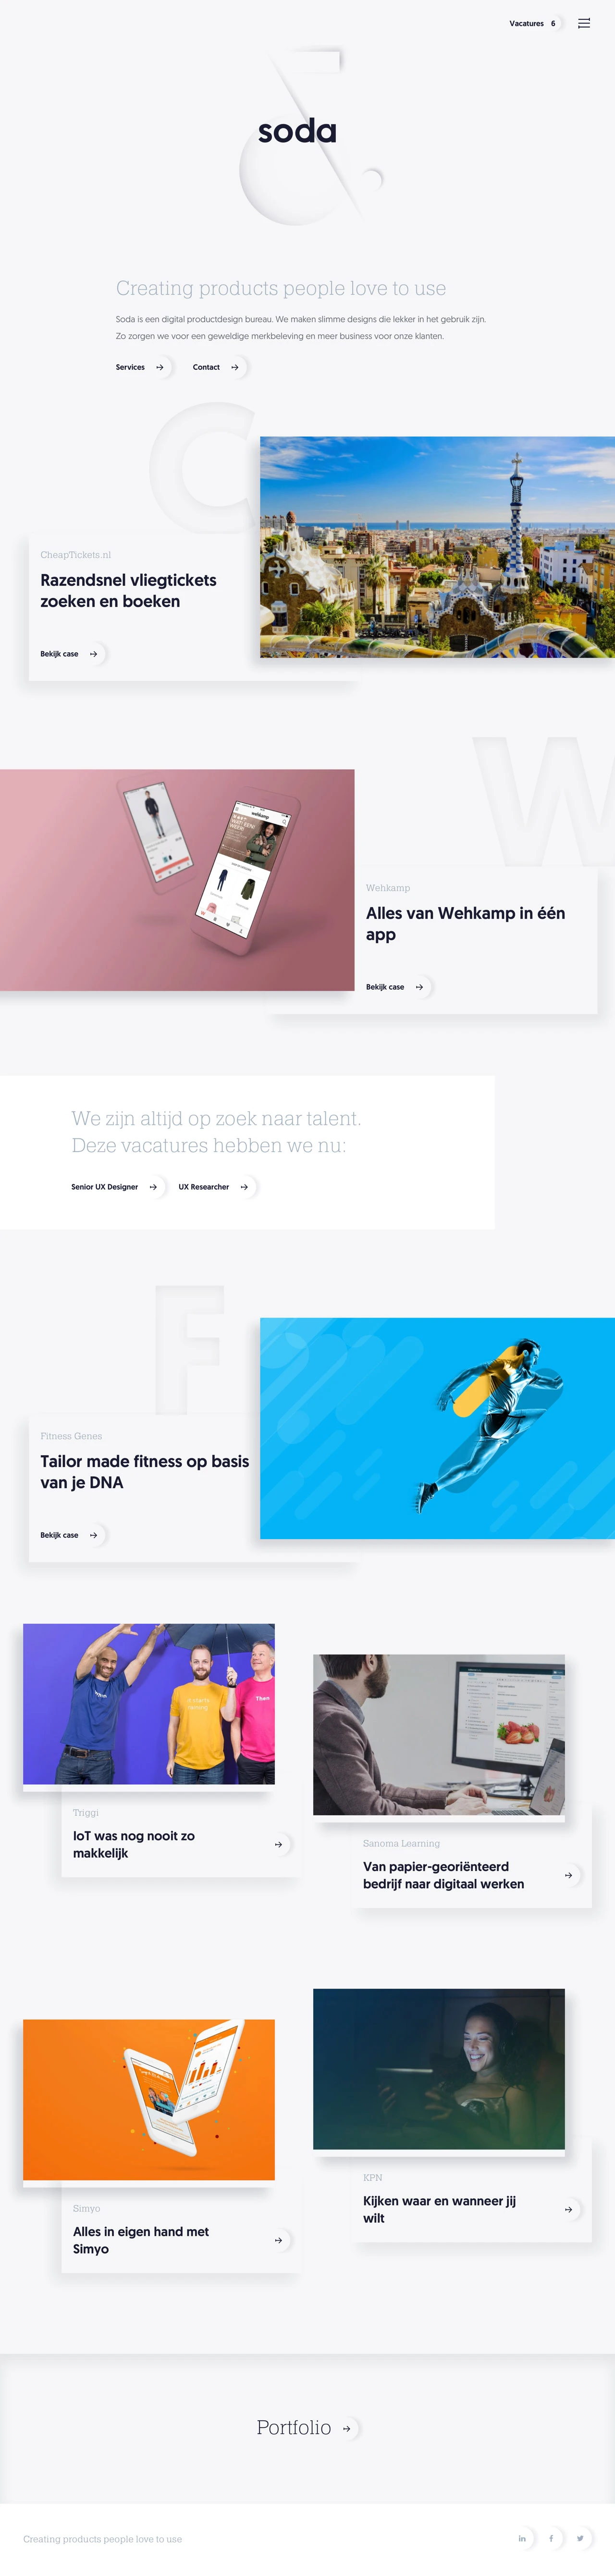 Soda Studio Landing Page Example: Soda is a digital product design agency. We make smart designs that are nice to use. This way we ensure a great brand experience and more business for our customers.